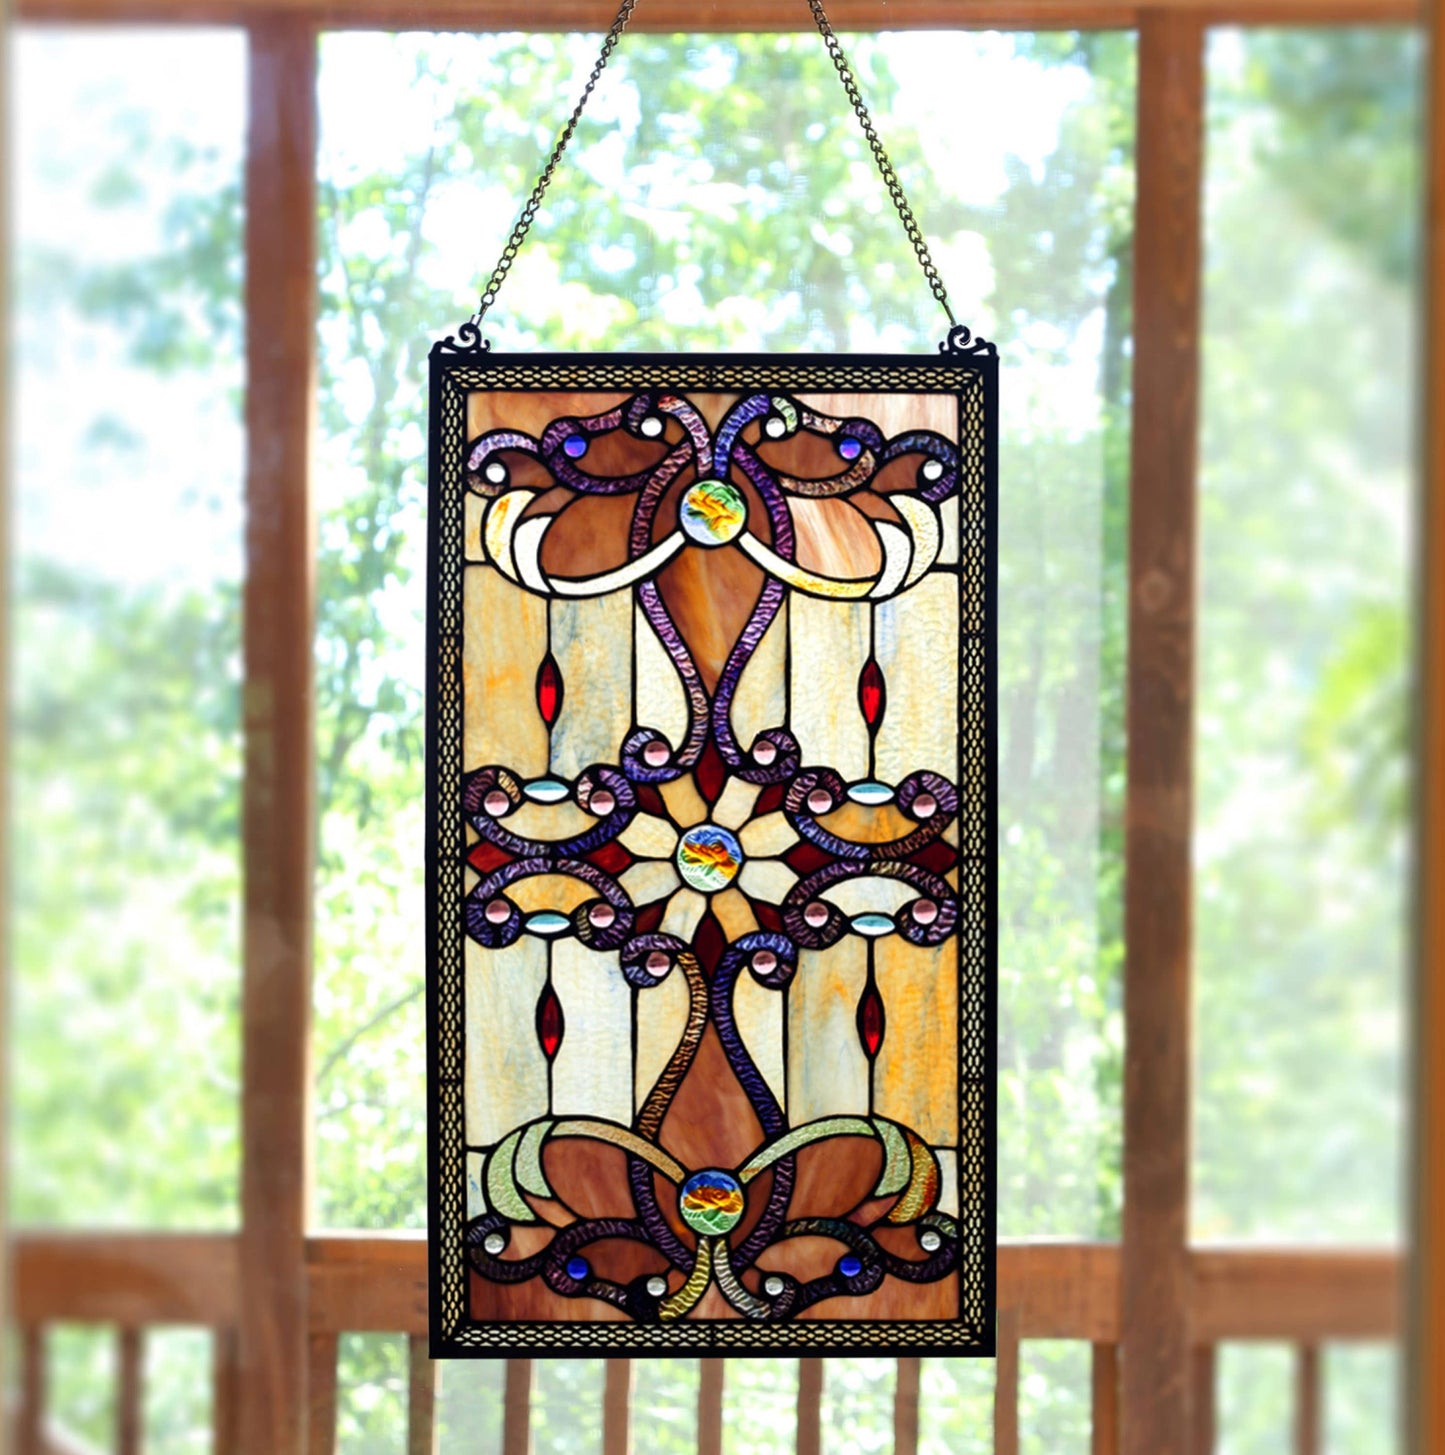 River of Goods - 26"H  Wyatt Amber Stained Glass Window Panel